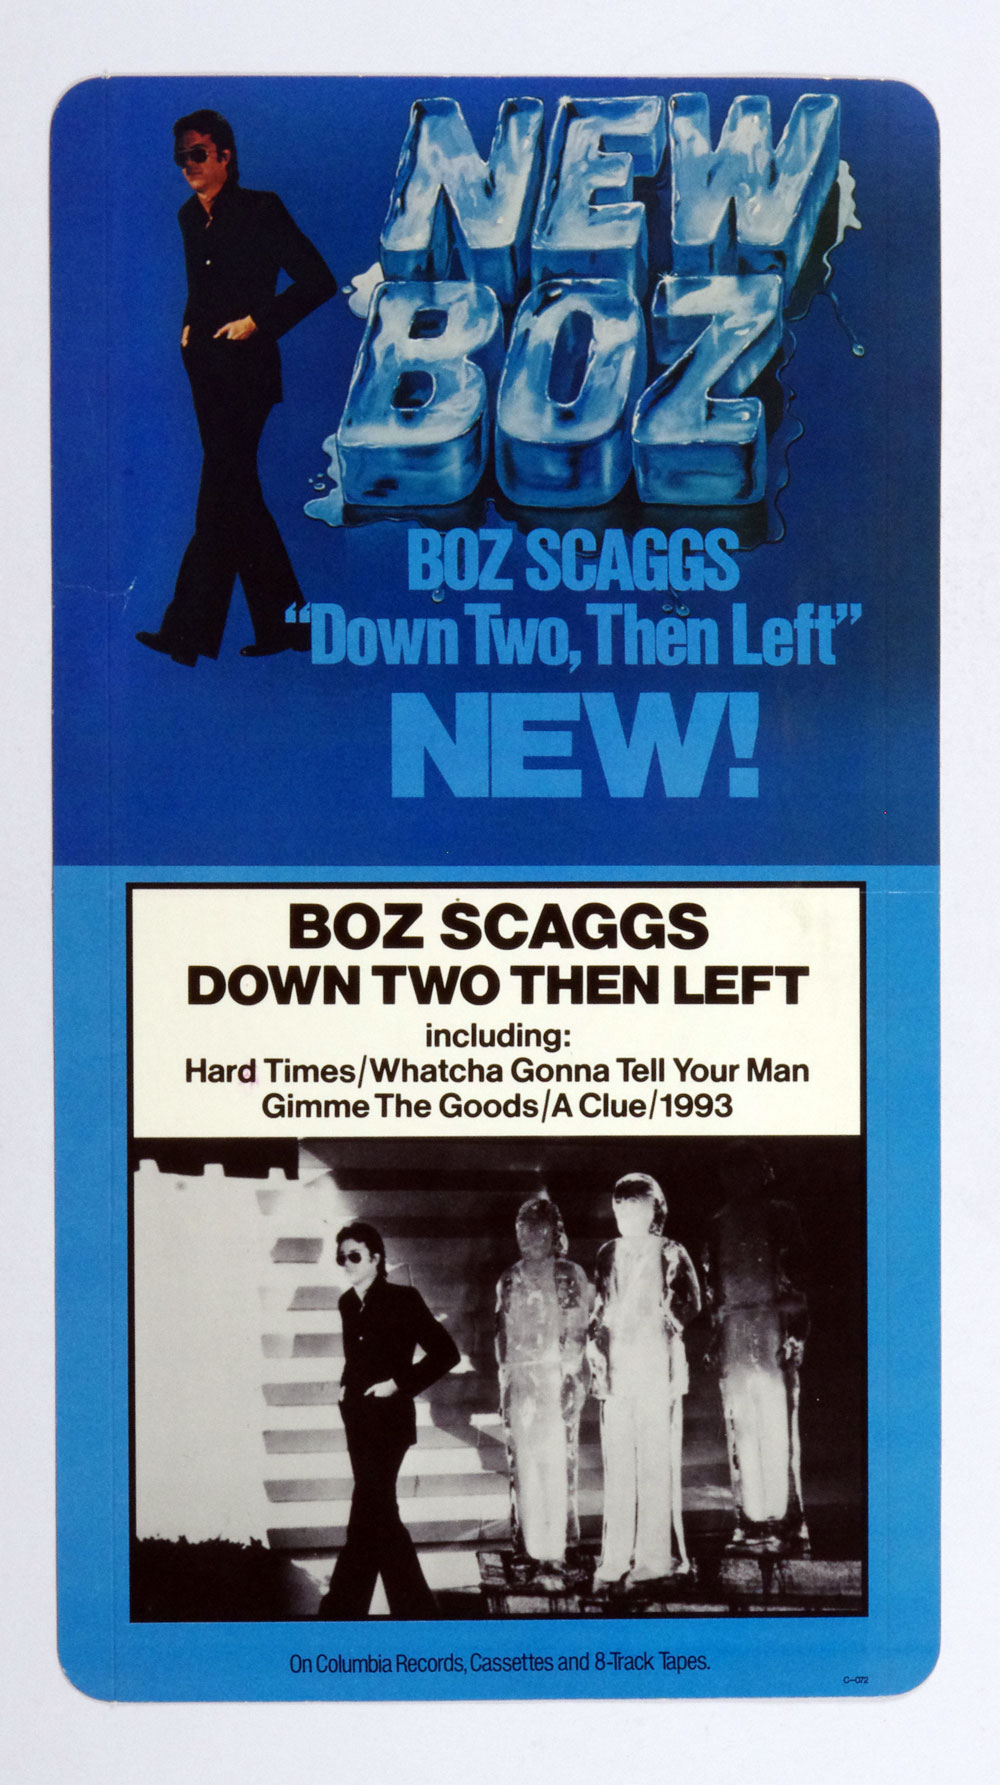 Boz Scaggs Poster Cardboard Display 1977 Down Two Then Left Album Promotion